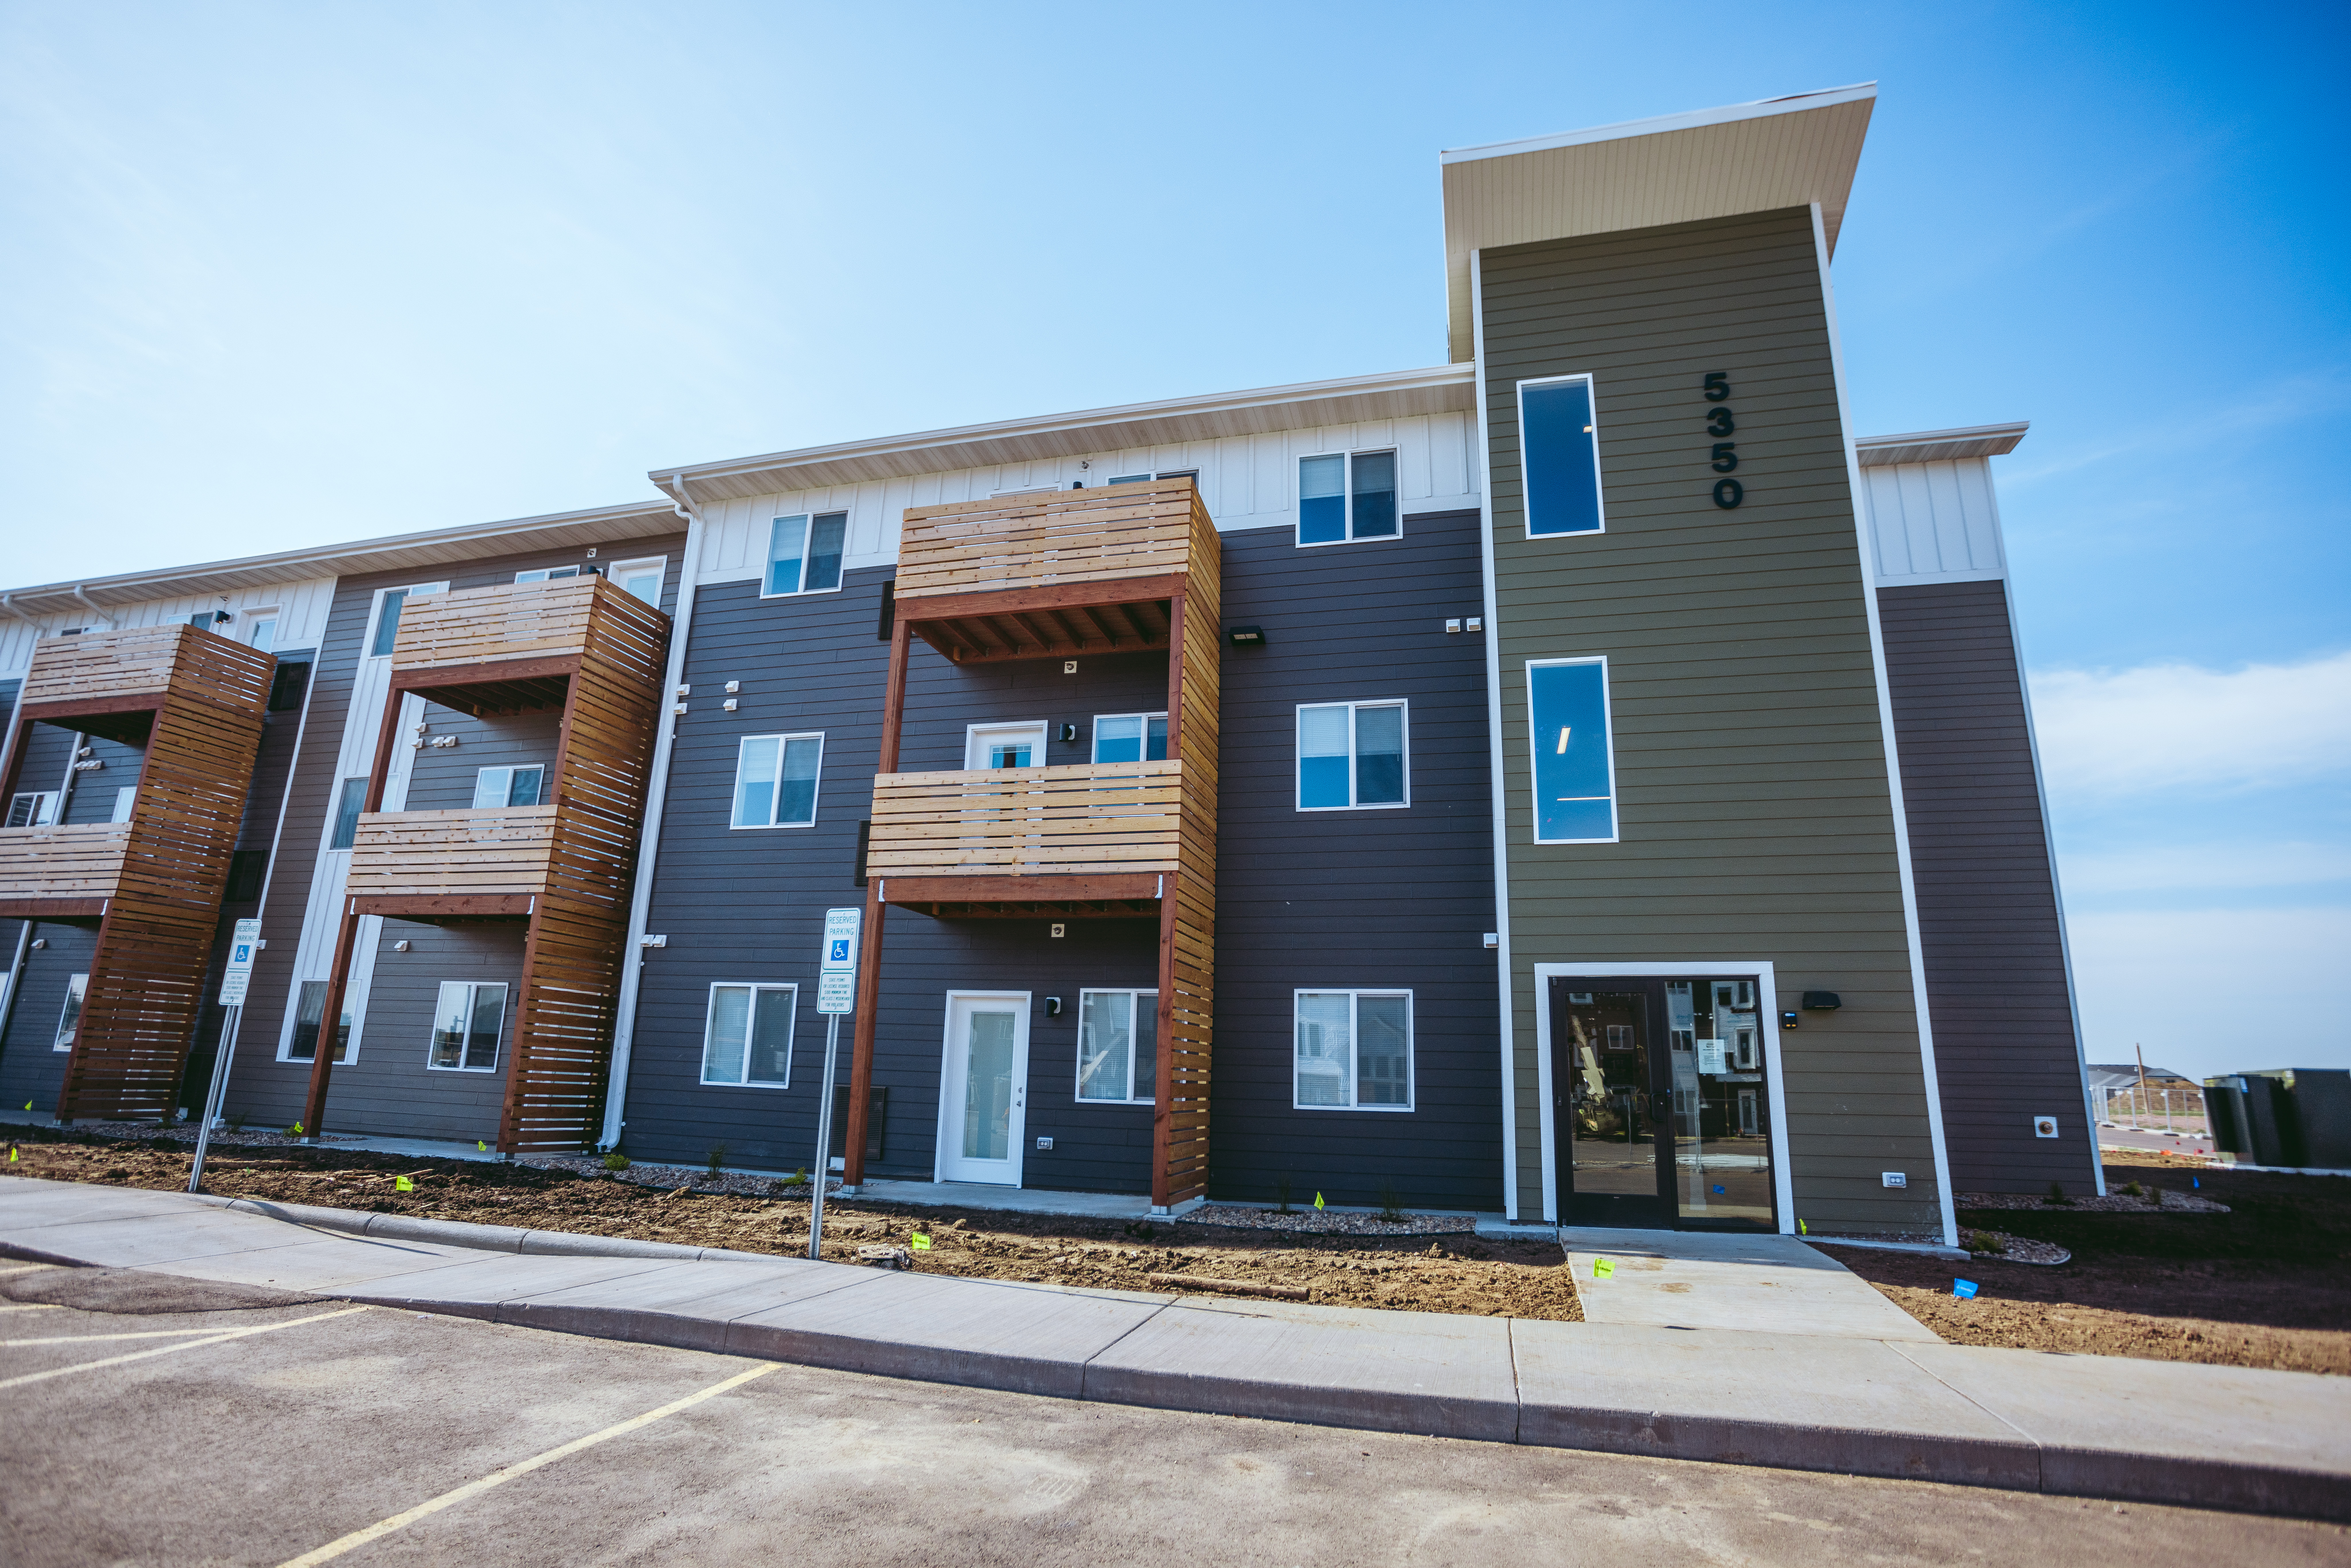 Lloyd Companies Announces New, Expanded Multifamily Developments In Booming Northwest Sioux Falls